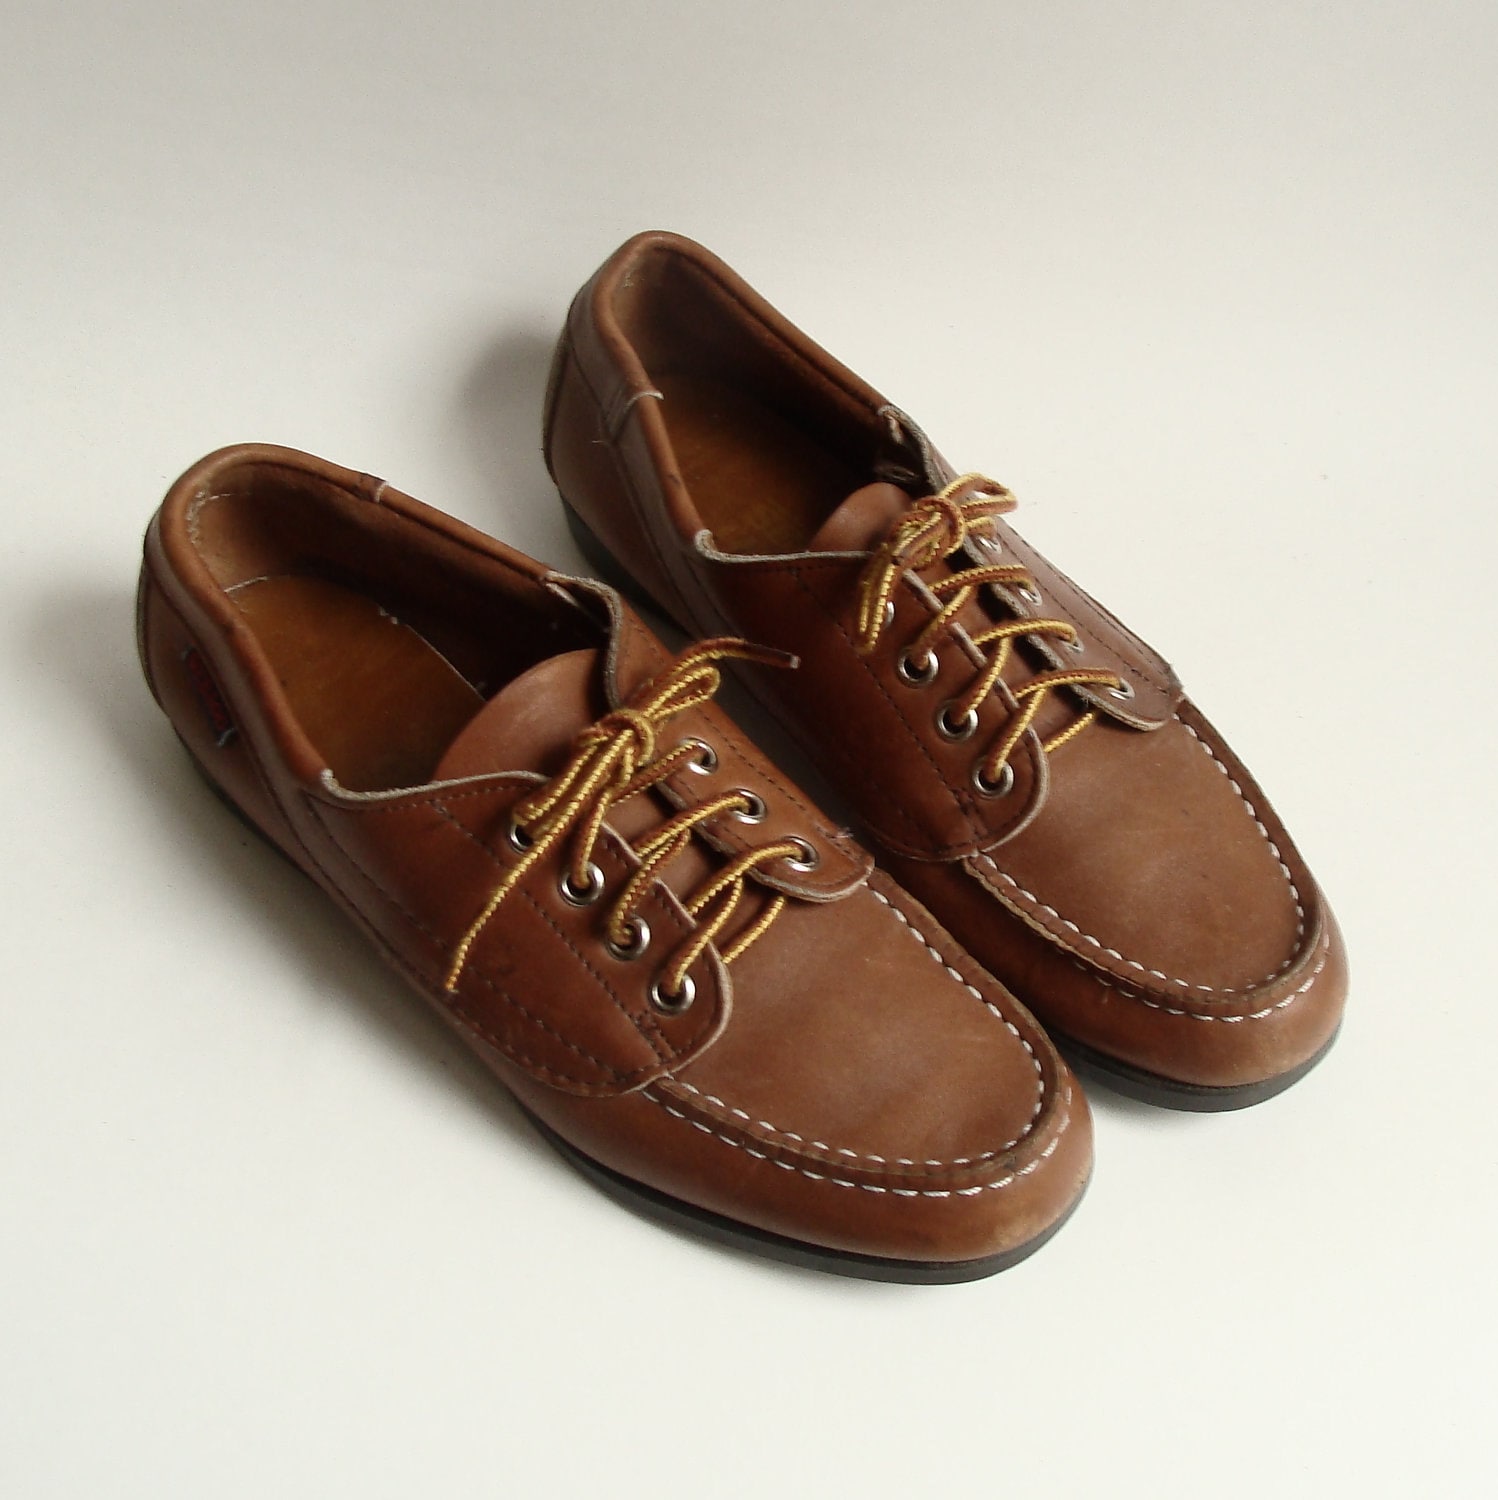 shoes size 7.5 / brown leather 80s loafers / 80s sebago